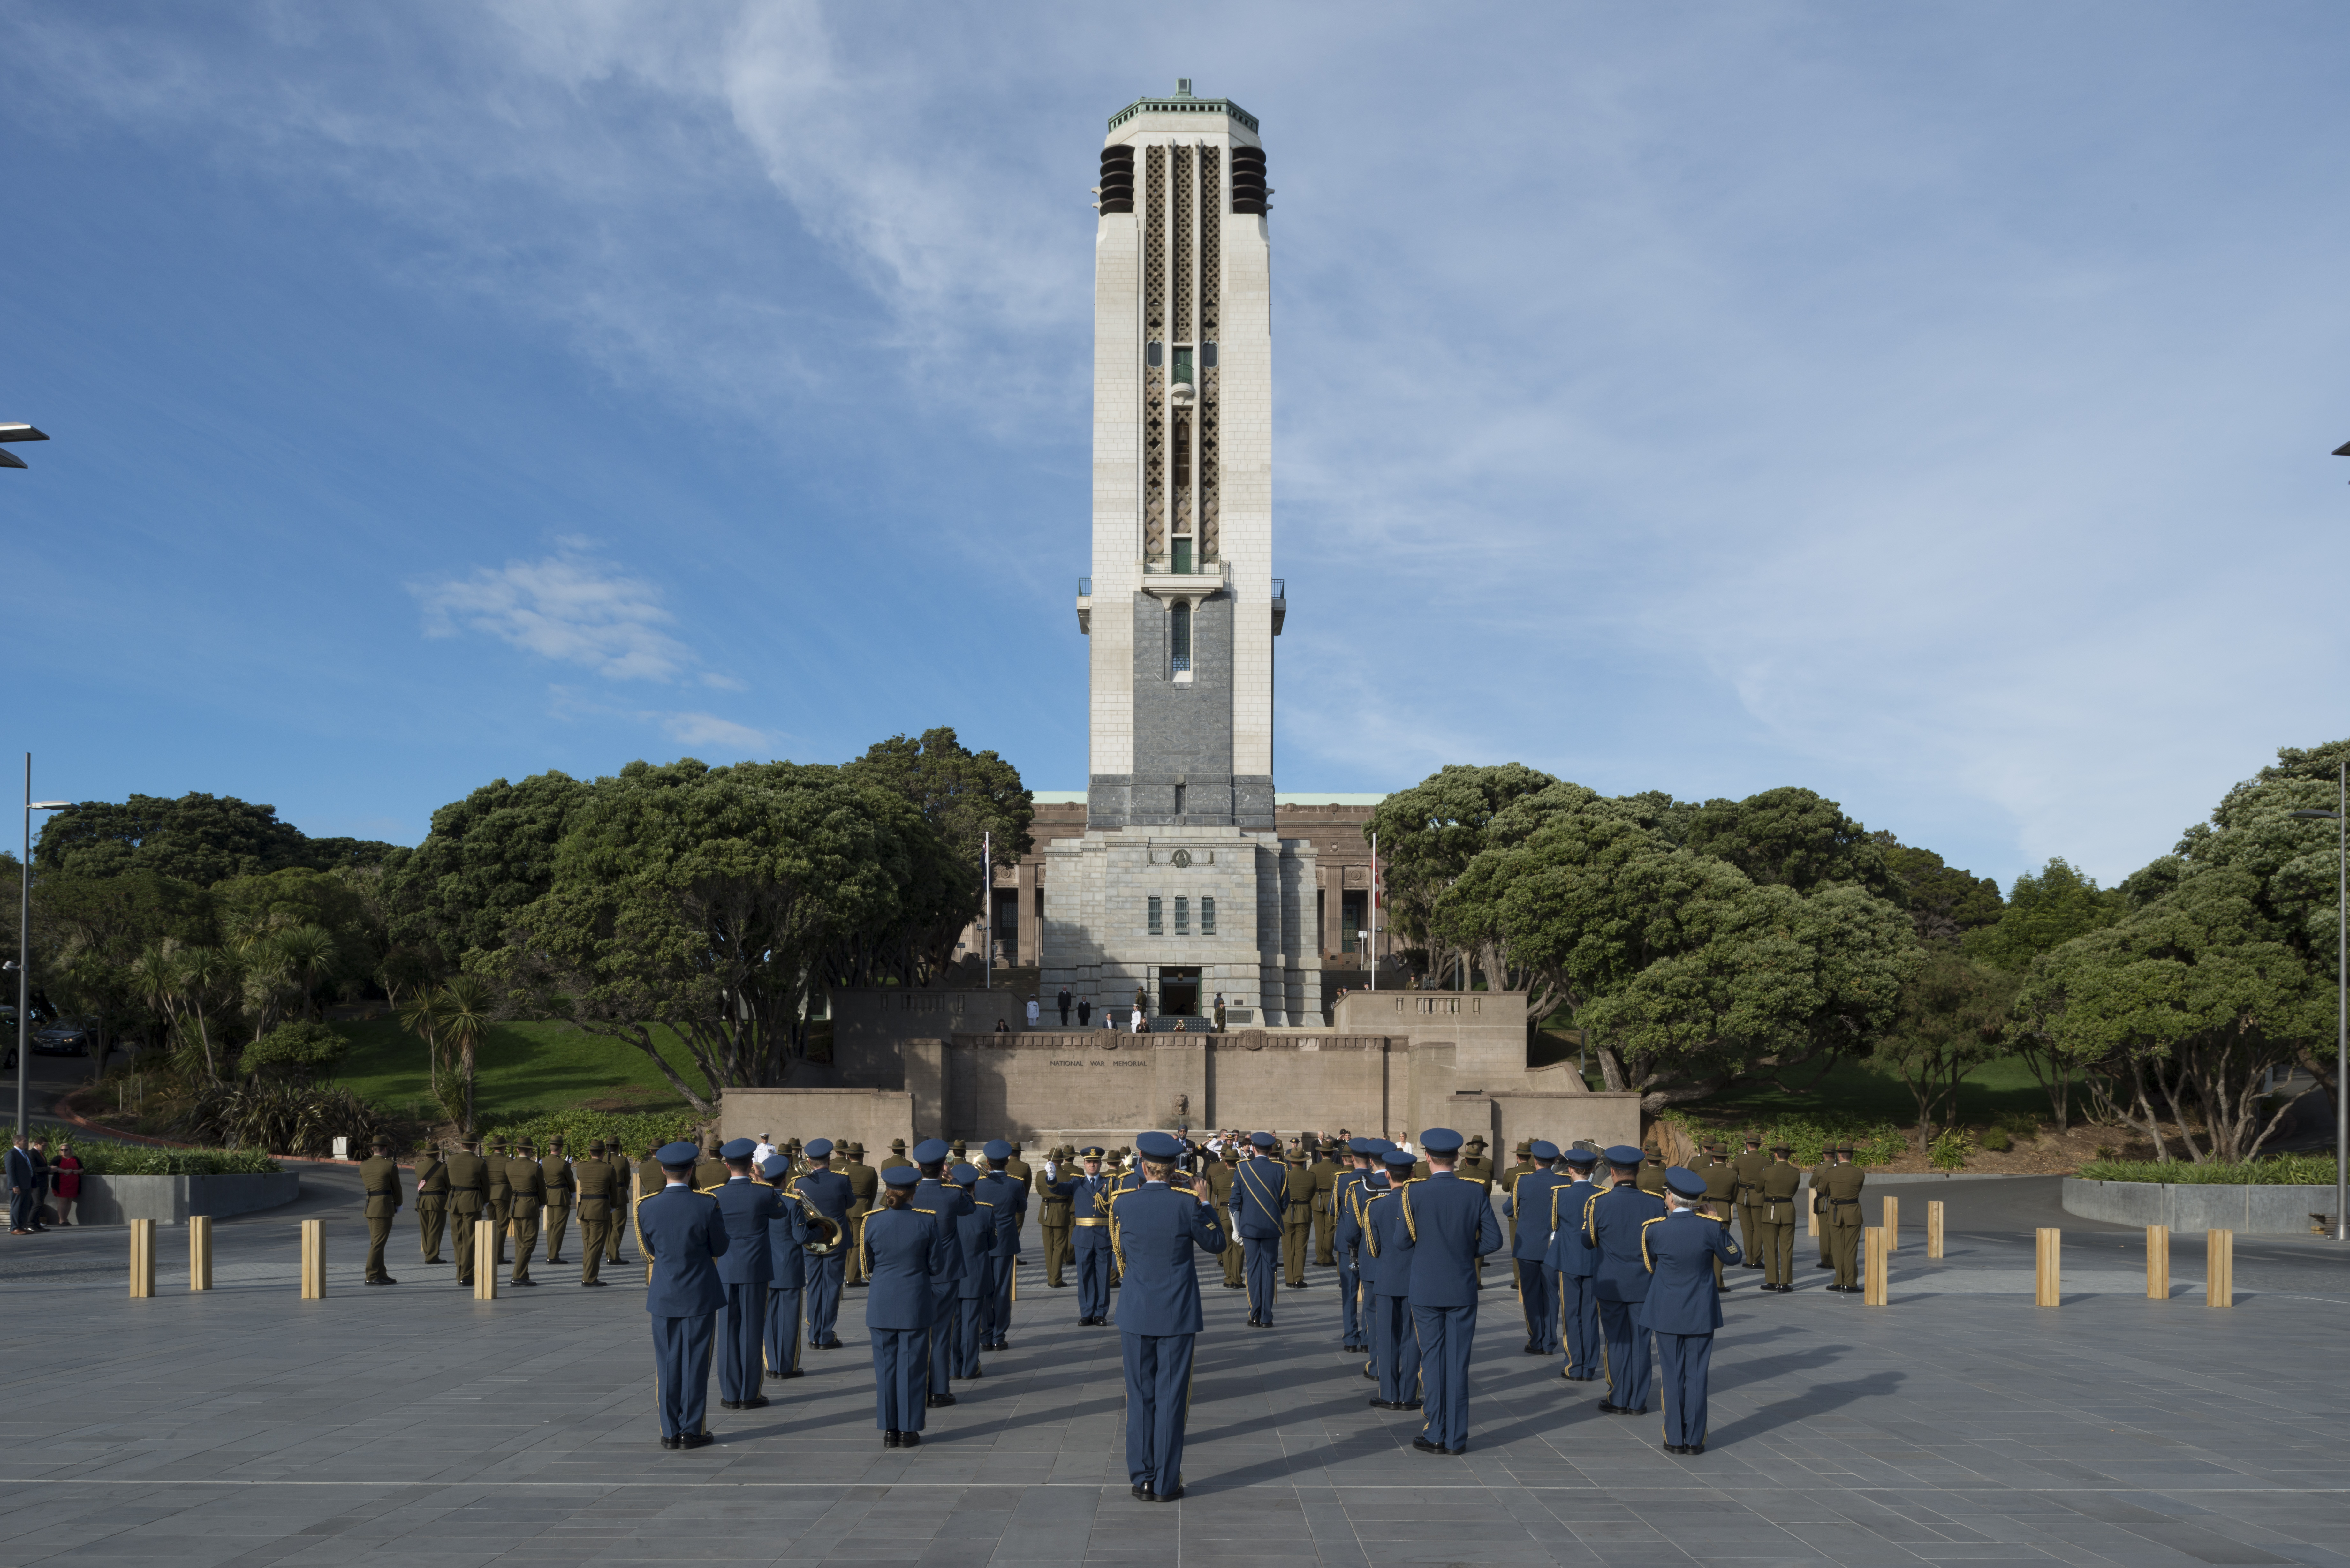 The Carillon Tower with a  military band and soldiers standing in front of it.